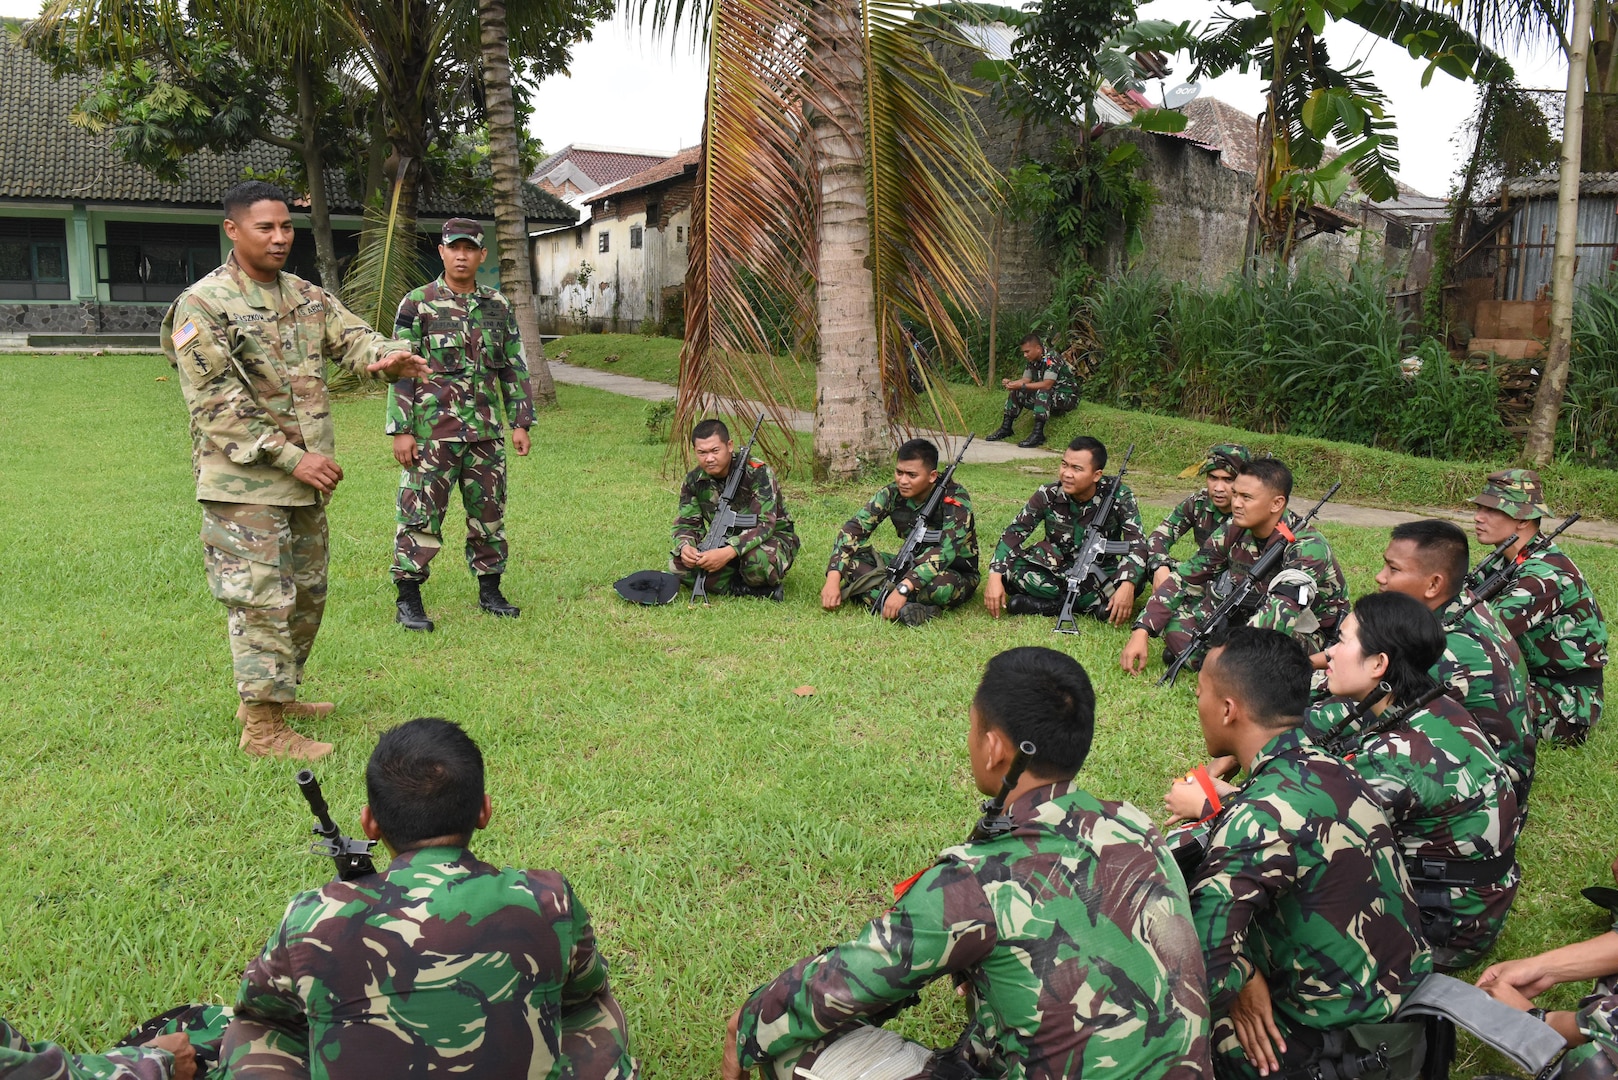 U.S. Army Sgt. 1st Class Christian Staszkow, a member of the Hawaii Army National Guard, conducts an after action review with Soldiers from the Indonesia Army following an infantry patrol practical exercise during the Noncommissioned Officer Subject Matter Expert Exchange for the Hawaii Army National Guard State Partnership Program in Bandung, Indonesia, at the PUSDIKIF Infantry Education Center Feb. 26, 2016. The NCO exchange is designed for military personnel from Hawaii and the Indonesian NCOs to learn each other’s military tactics, procedures and culture all while building a lasting friendship.